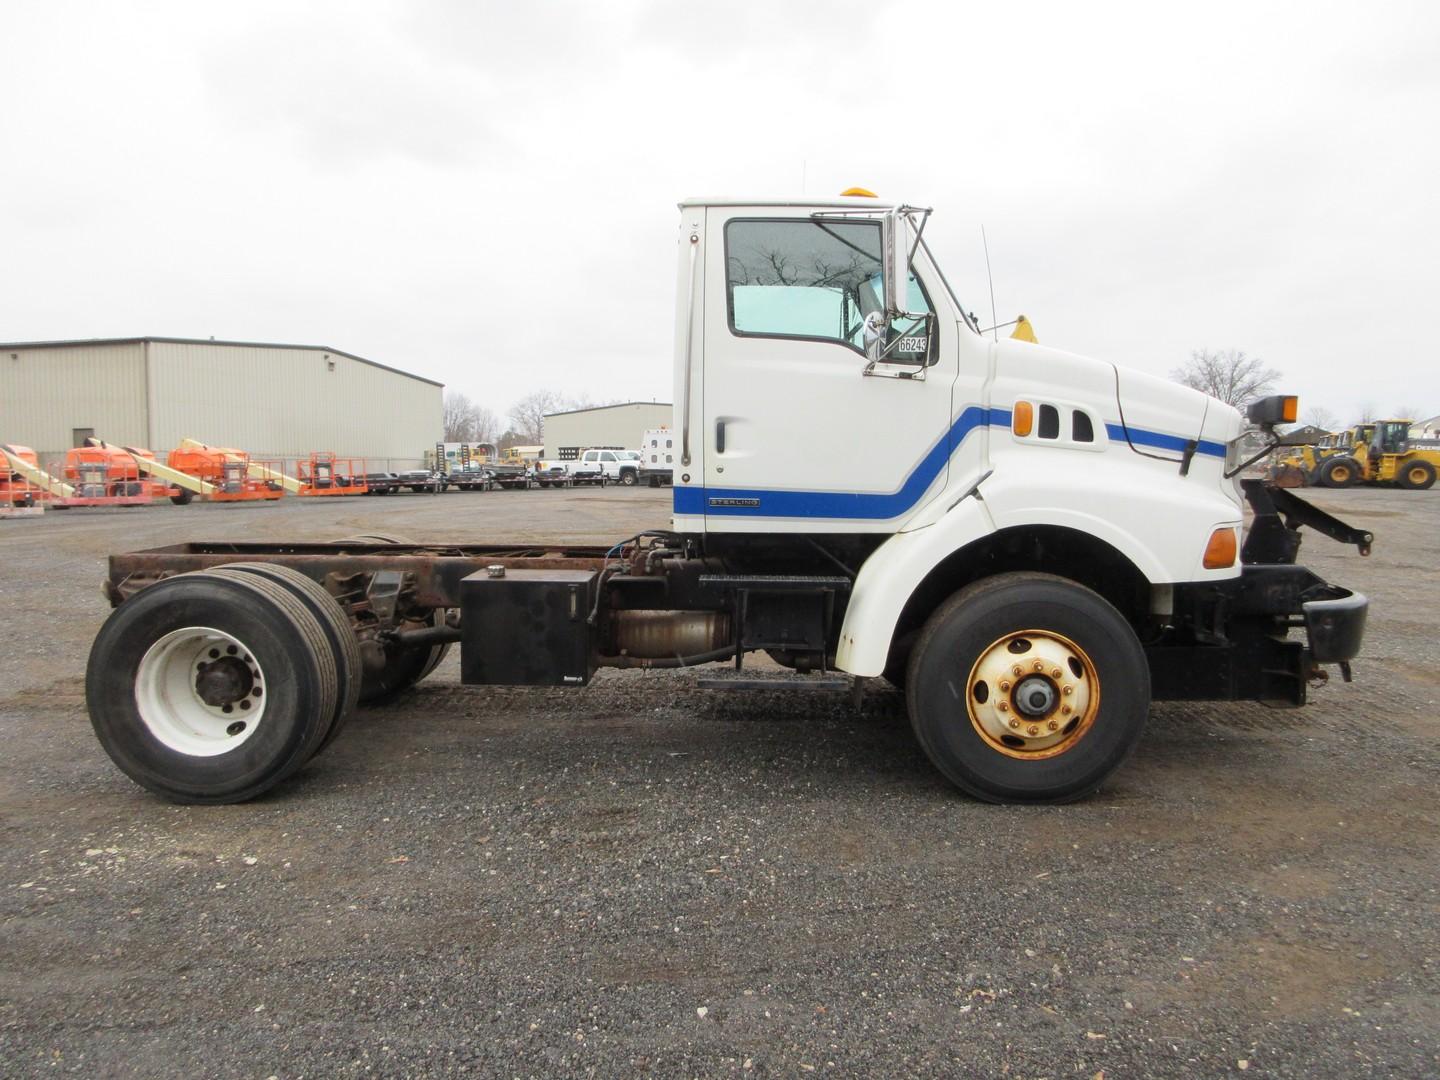 2003 Sterling S/A Cab & Chassis